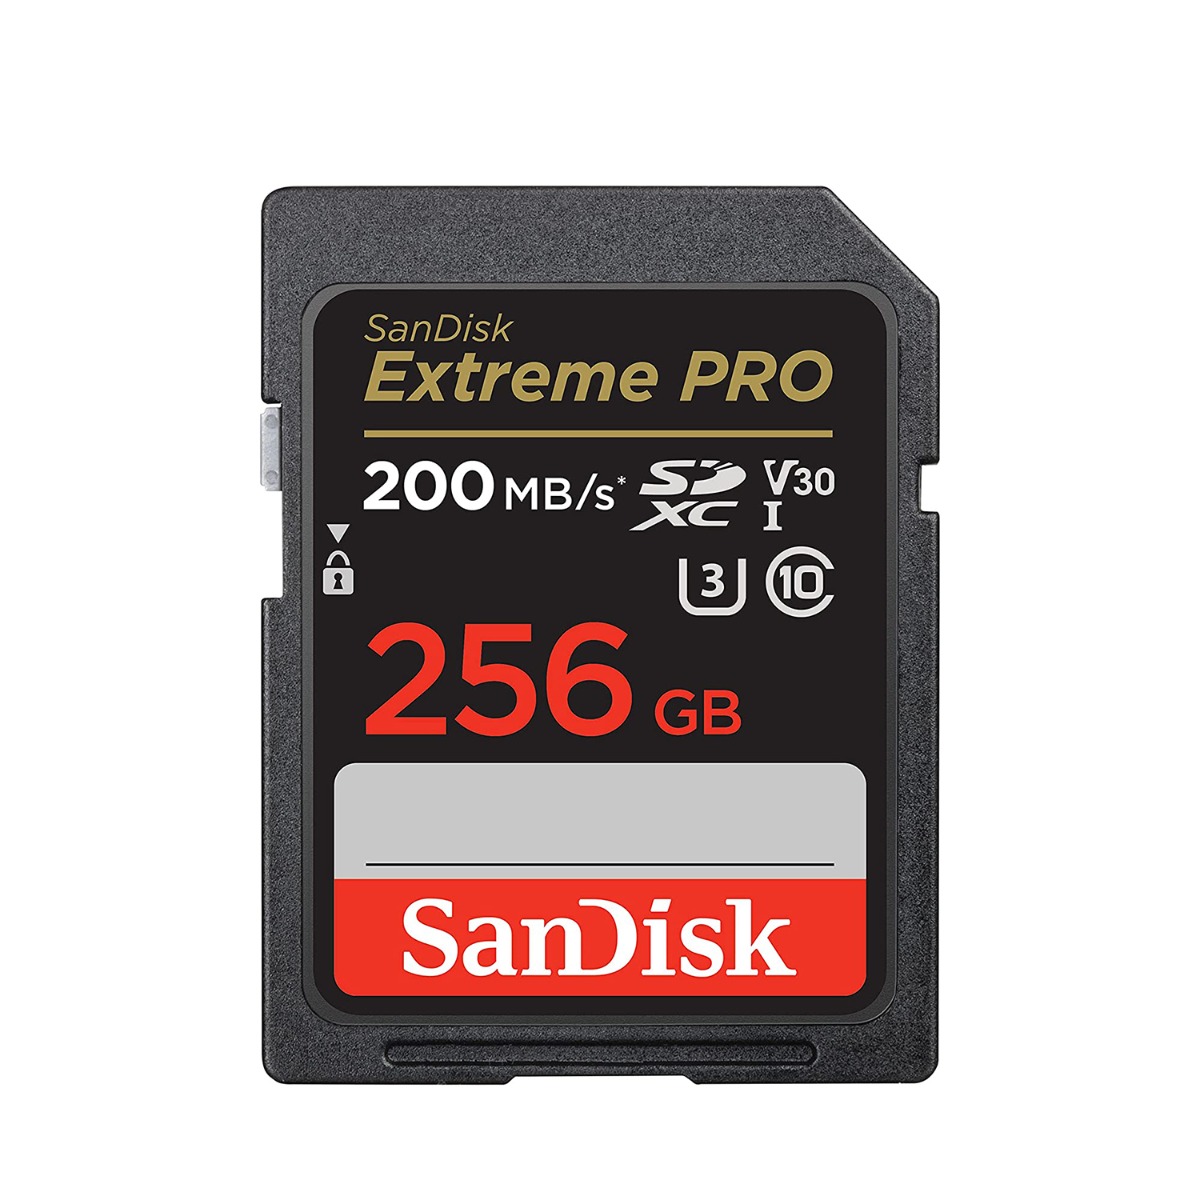 SanDisk 256GB Extreme PRO SDXC card + RescuePRO Deluxe, up to 200MB/s, UHS-I, Class 10, U3, V30